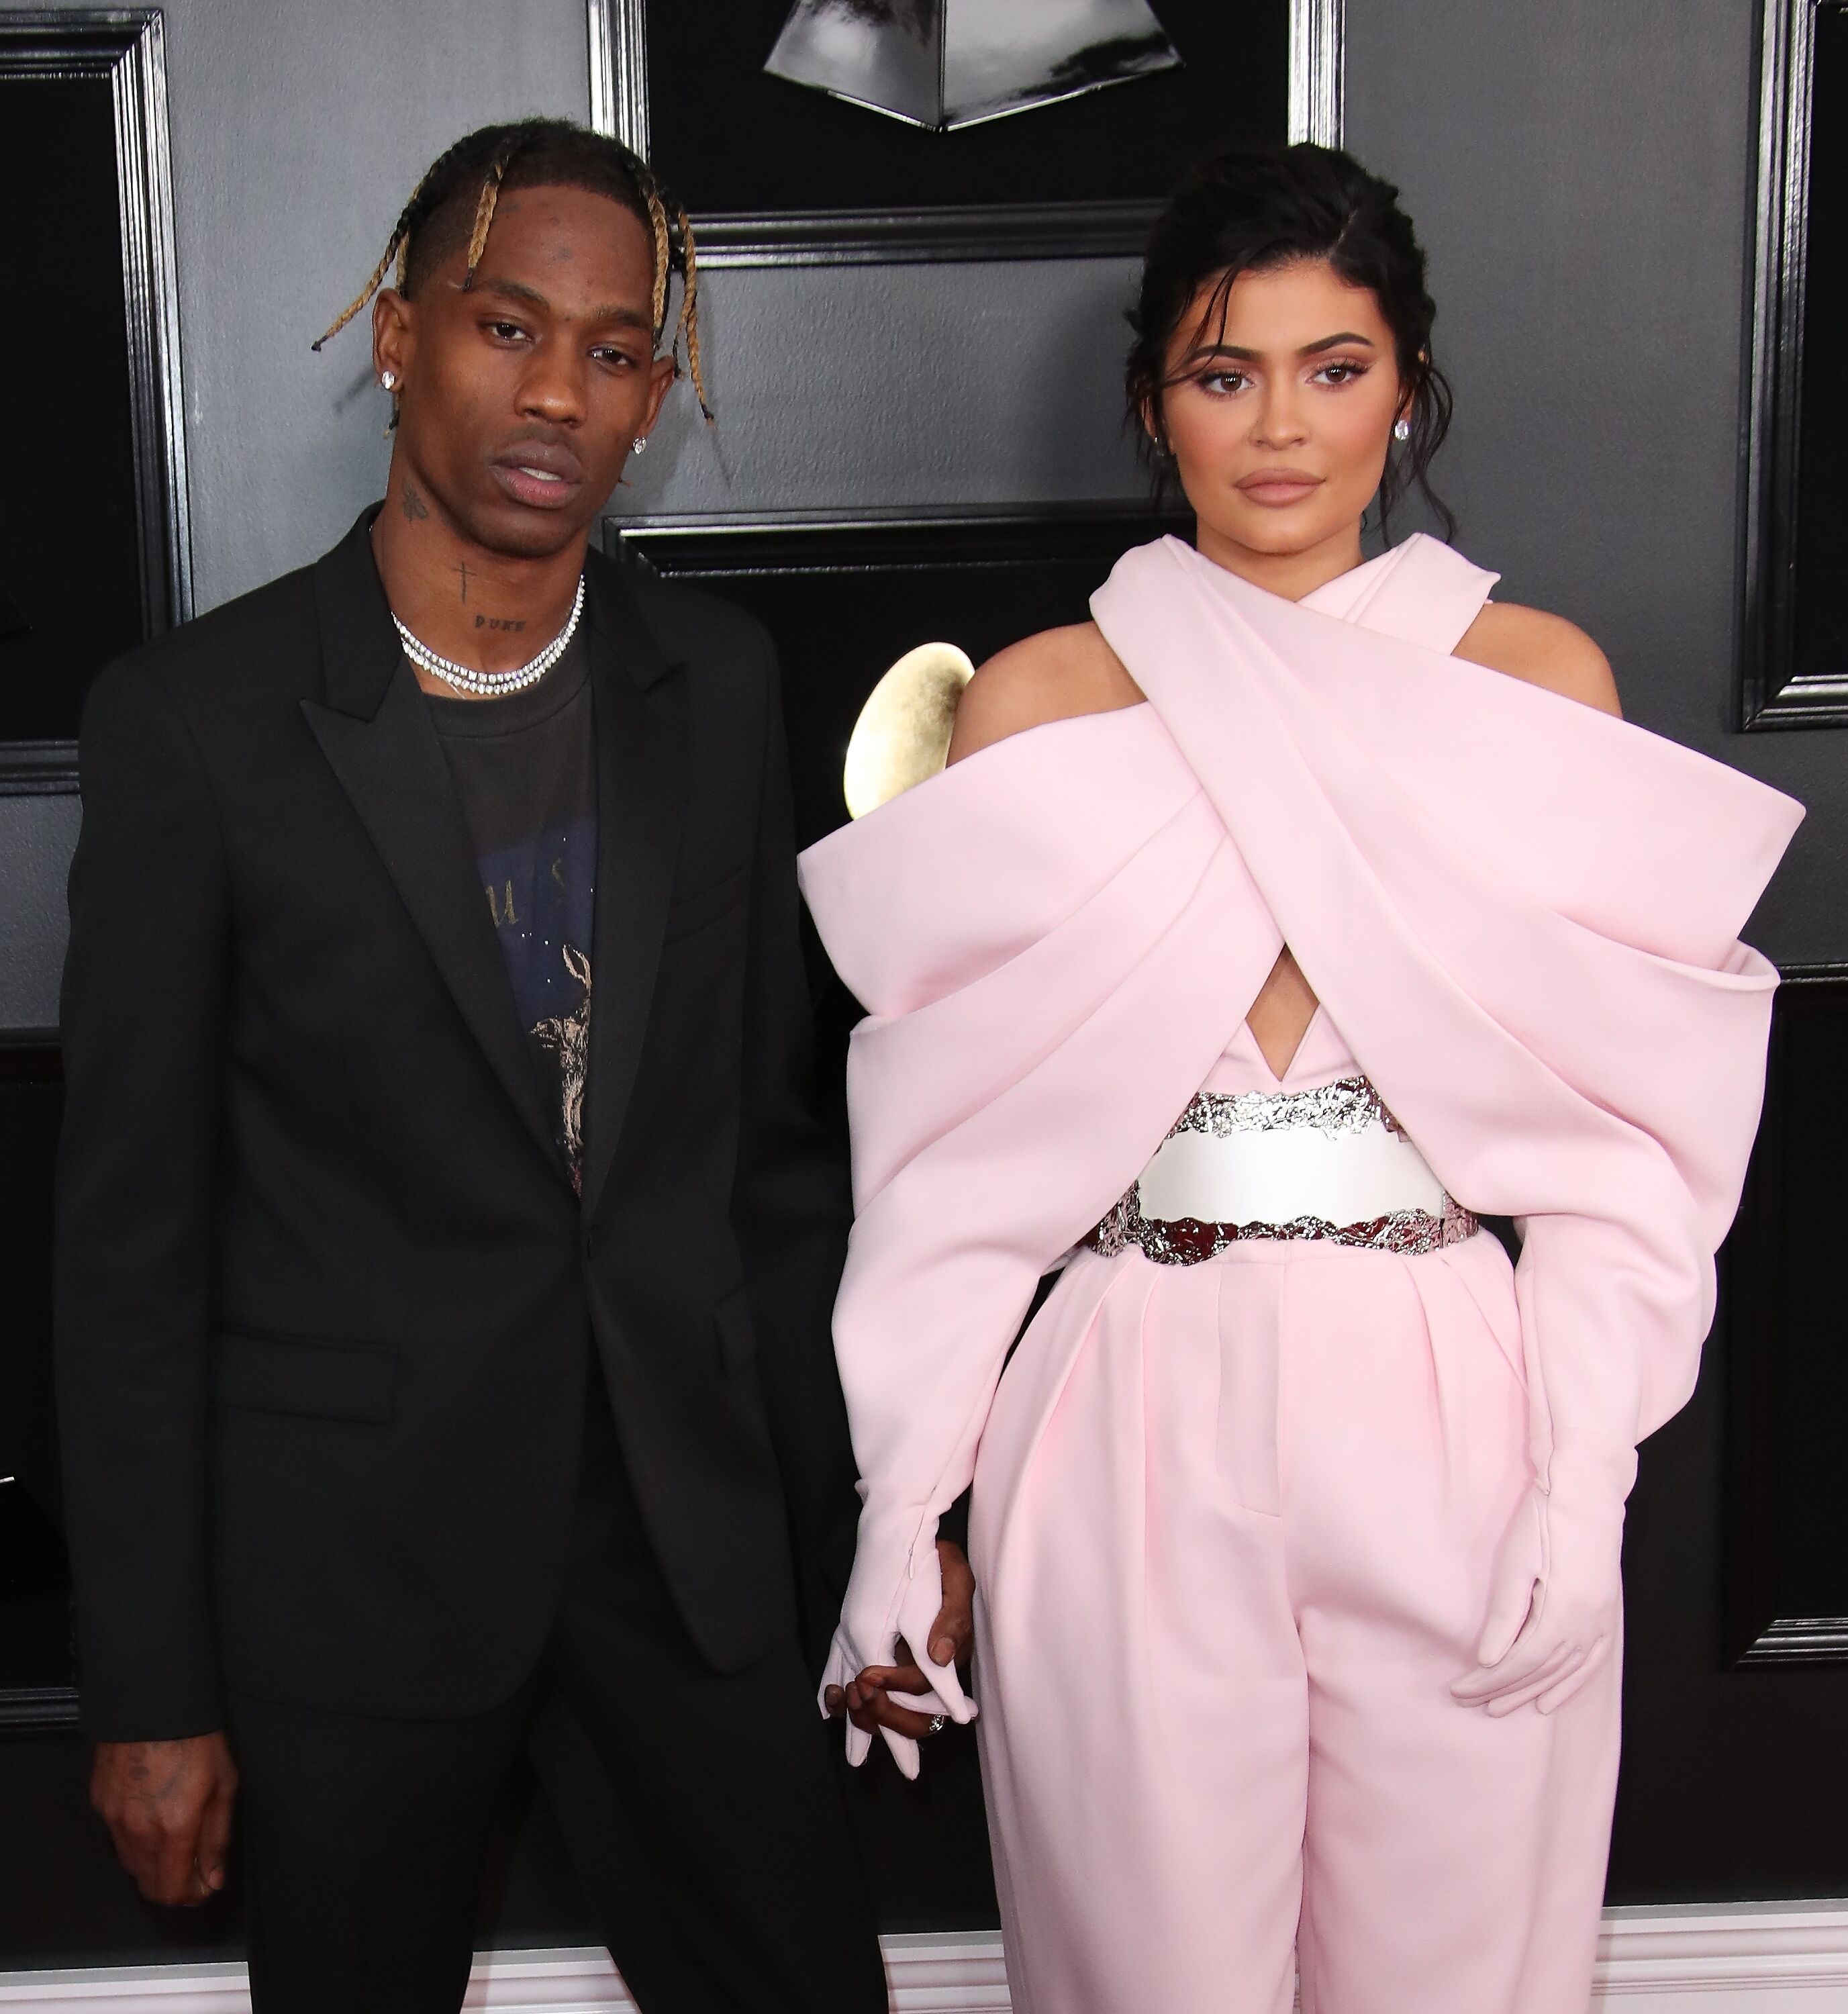  Travis Scott and Kylie Jenner attend the 61st Annual GRAMMY Awards at Staples Center on February 10, 2019 in Los Angeles, California. | Photo: Getty Images